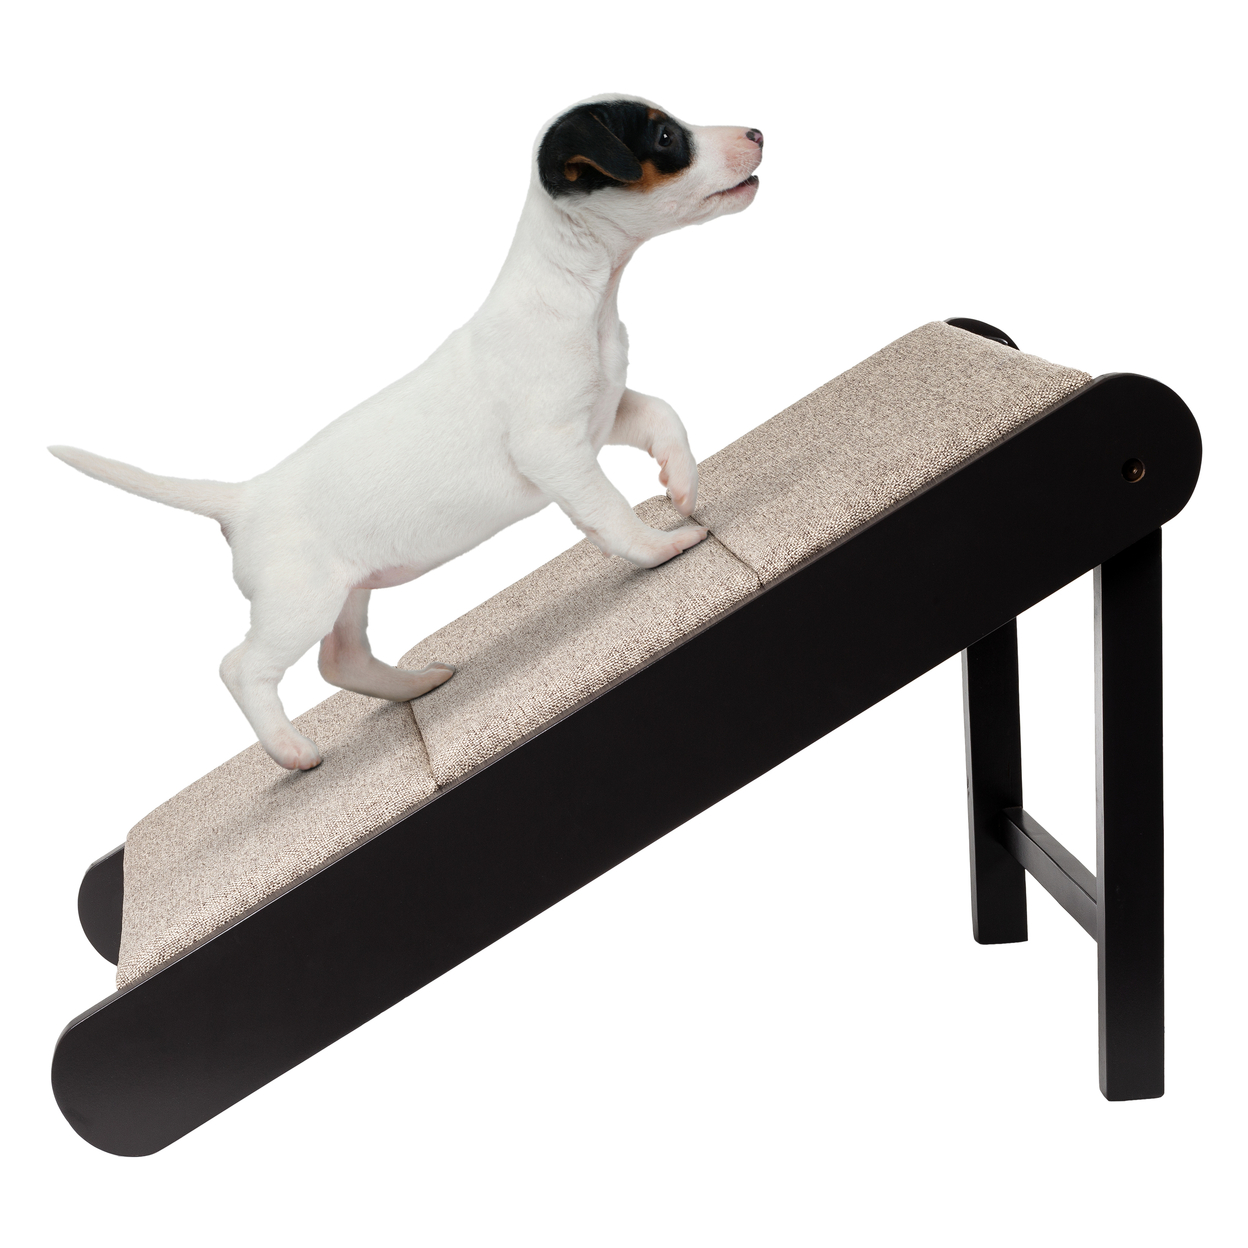 Pet Ramp Foldable Wooden Dog Ramp Dog Accessories For Small Dogs, Gray/Cream